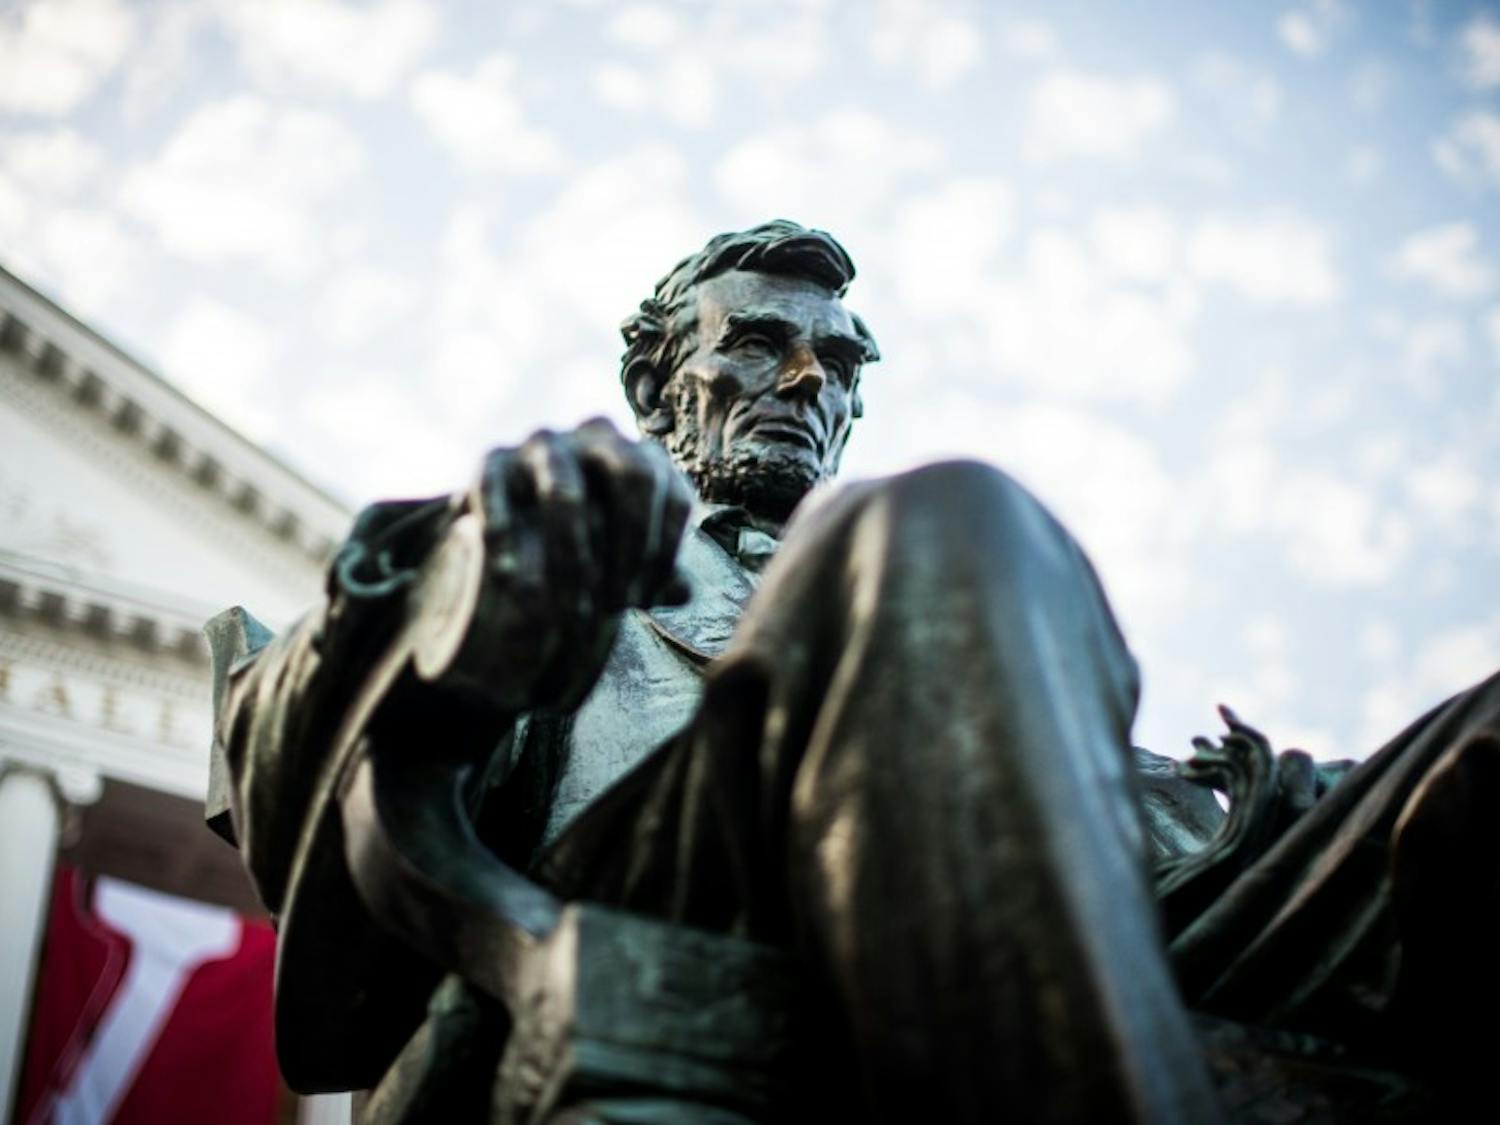 Despite legislation from ASM, Chancellor Rebecca Blank told The Daily Cardinal that the university does not plan to put a plaque on the university's statue of President Abraham Lincoln recognizing his role in the deaths of natives.&nbsp;